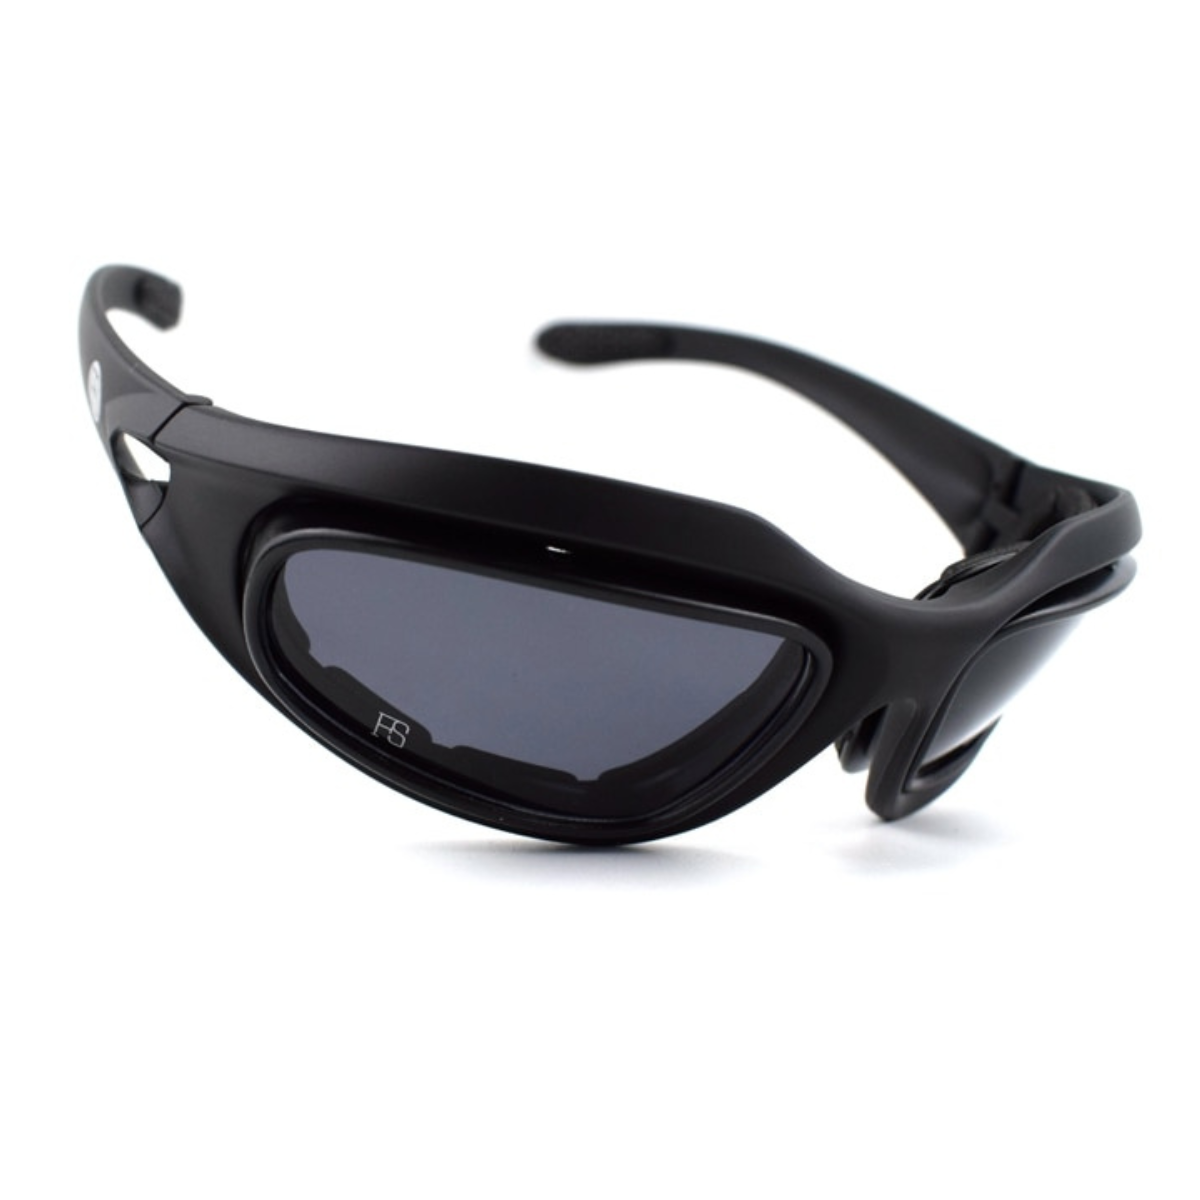 A pair of Classic Daisy Biker Motorcycle Sunglasses on a white background providing protection against harmful rays.